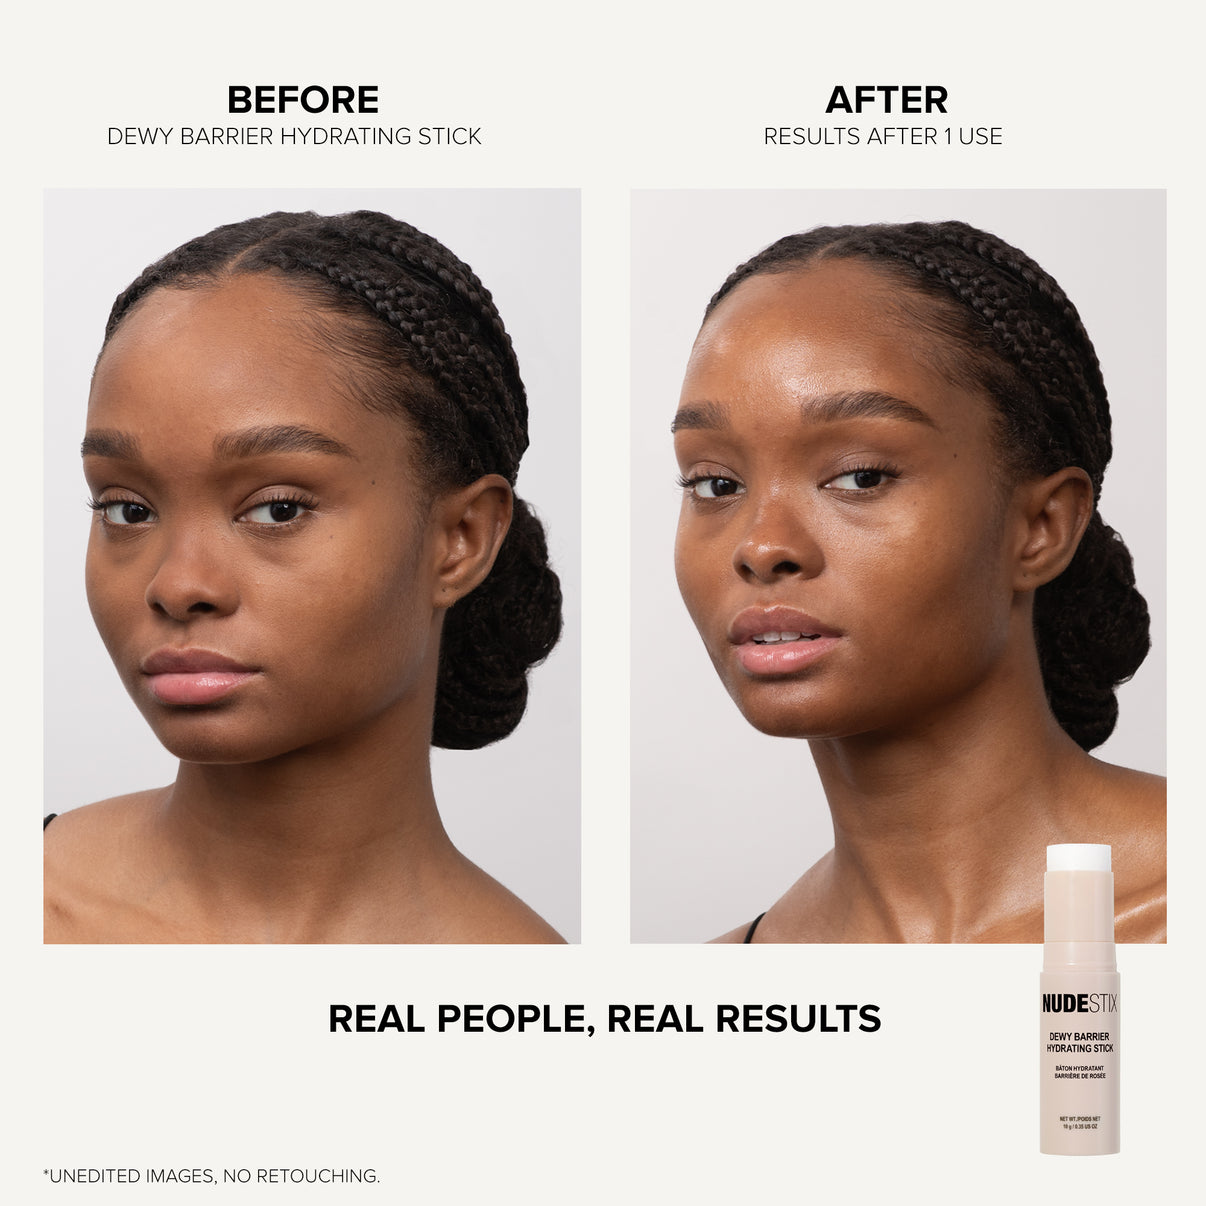 Dark skinned model before and after using Dewy Barrier Hydrating Stick